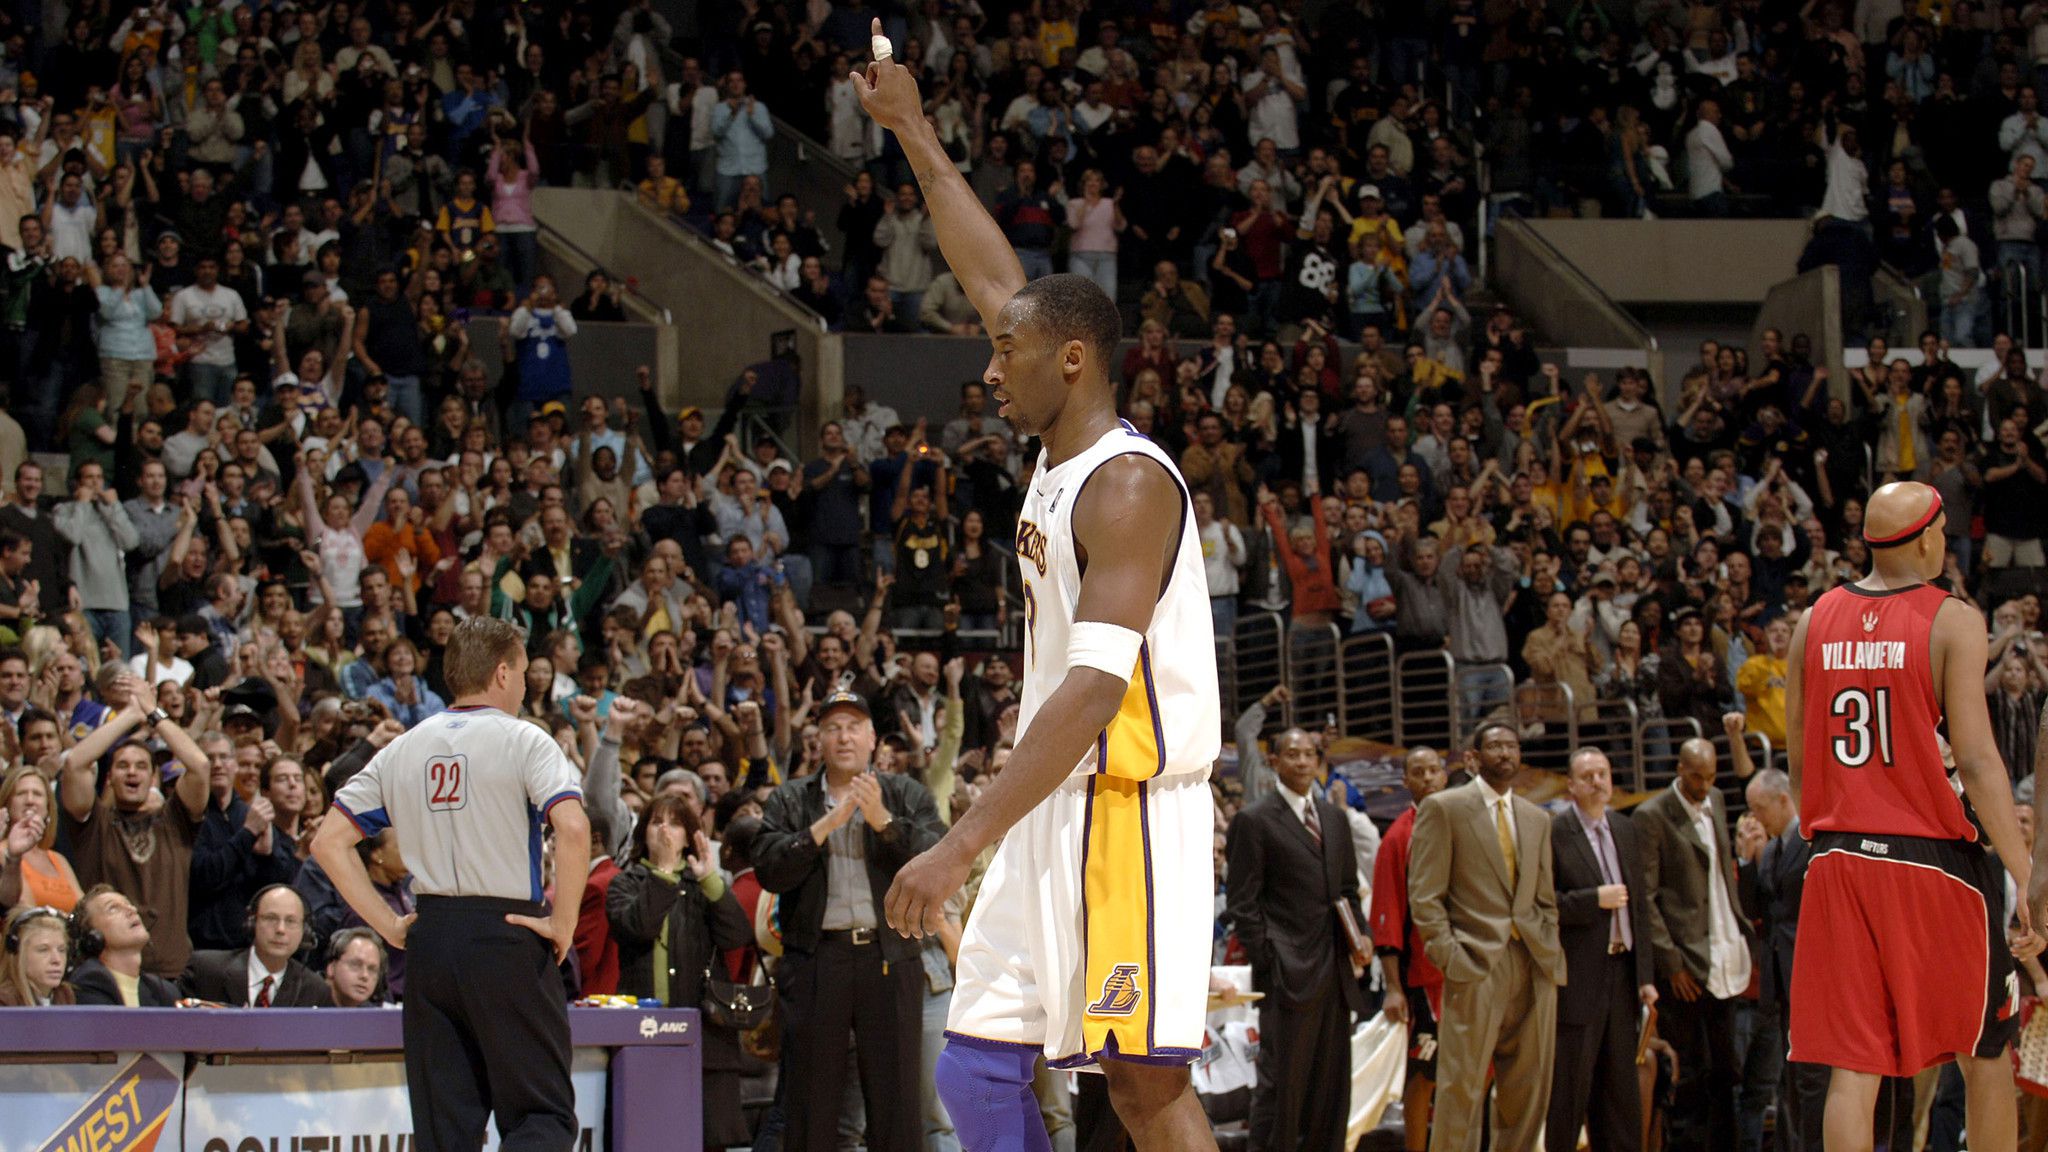 Remembering the night Kobe Bryant scored 81 points - Los Angeles Times